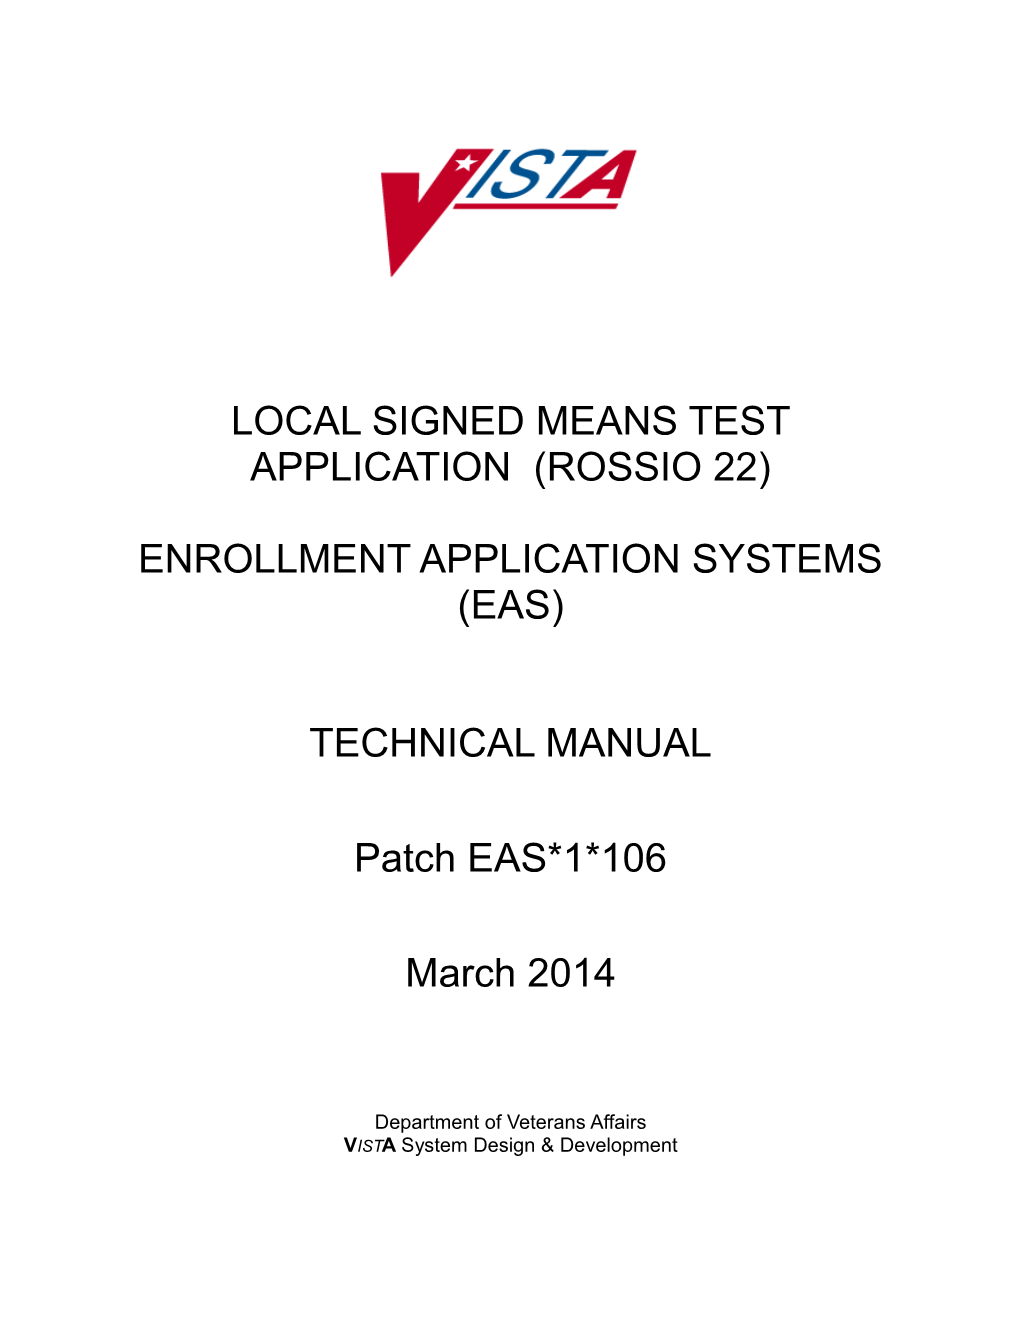 Local Signed Means TEST Application (Rossio 22)